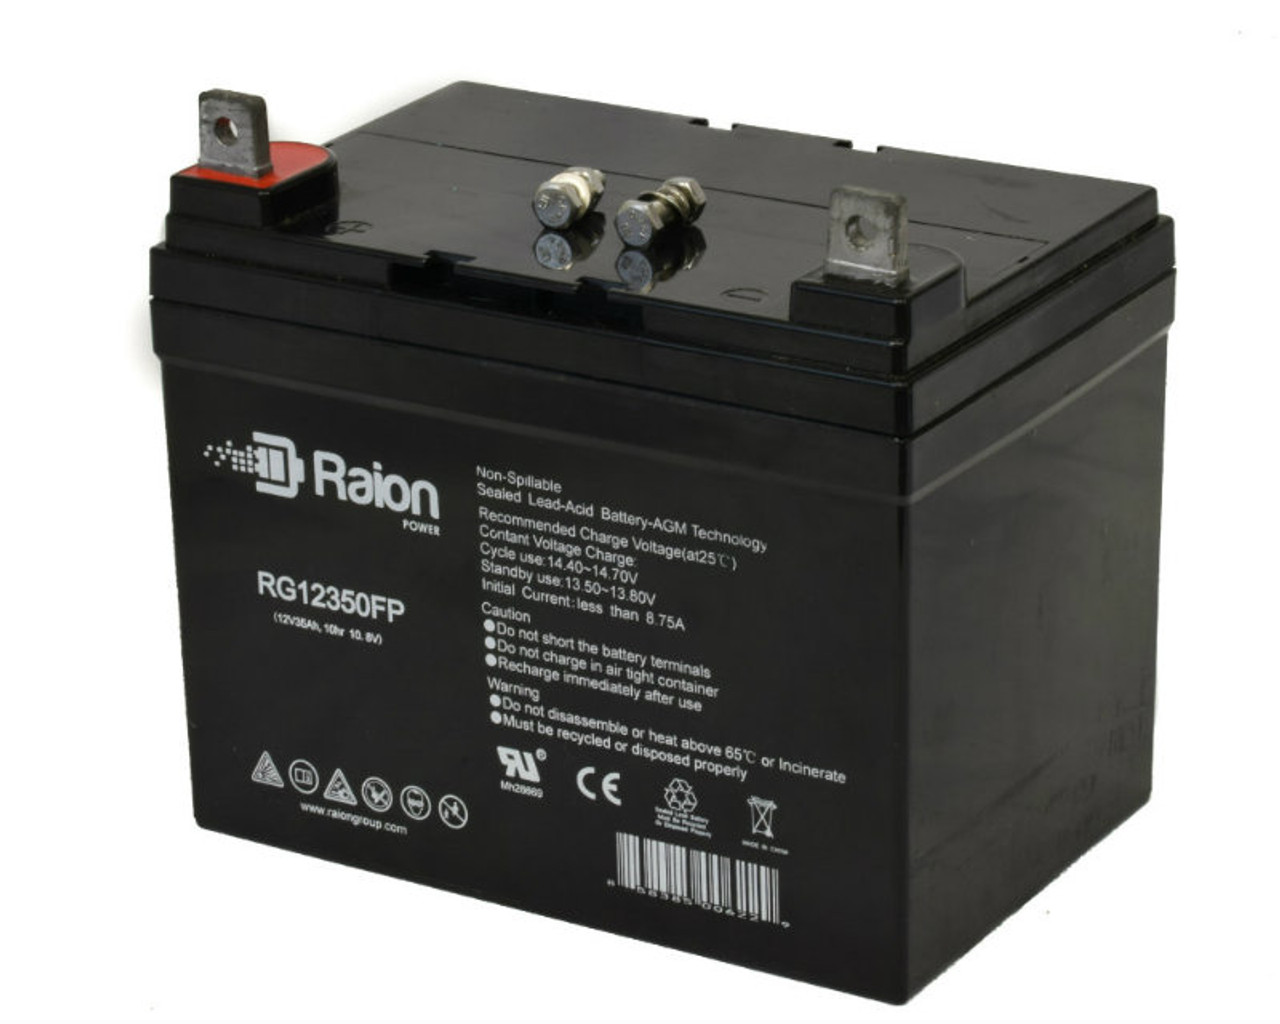 Raion Power Replacement 12V 35Ah RG12350FP Battery for Vision HF12-165W-X